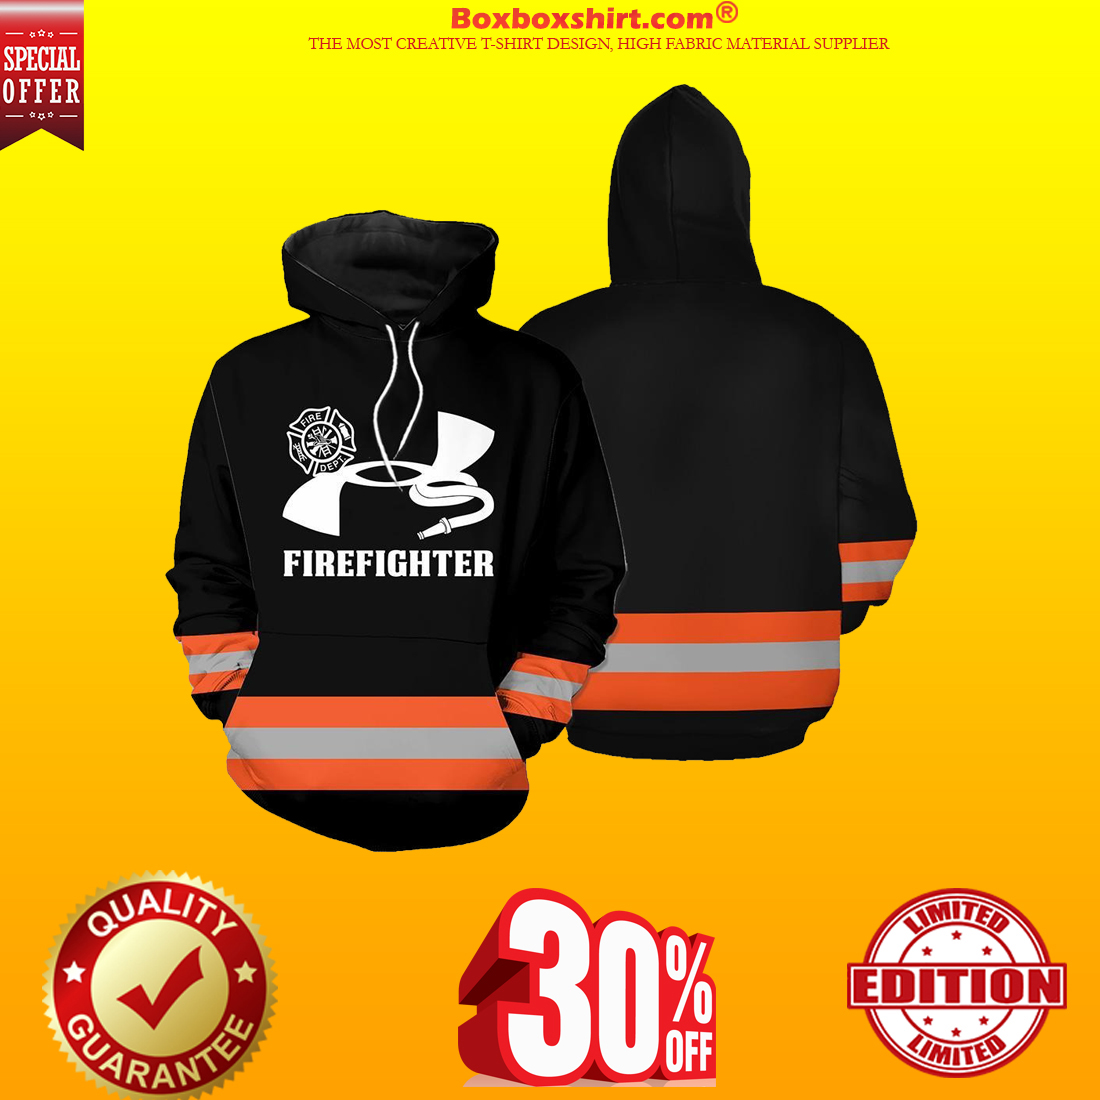 Under Armour firefighter hoodie and shirt orange line 3d